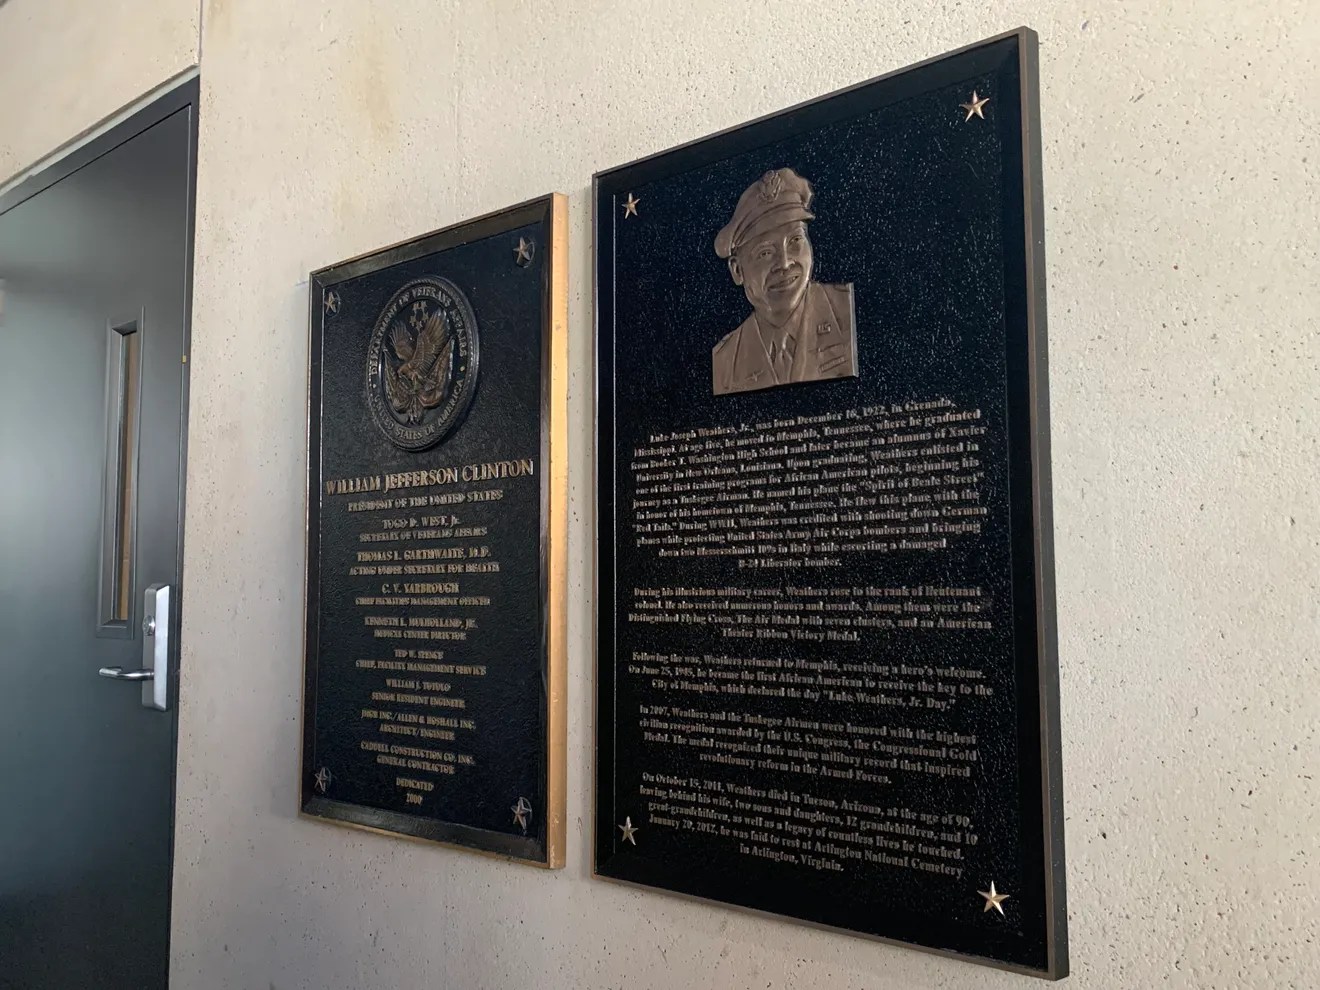 A plaque dedicated to Luke Weathers, Jr. at the entrance to the hospital was also unveiled during the ceremony. (Jacob Wilt, The Commercial Appeal)